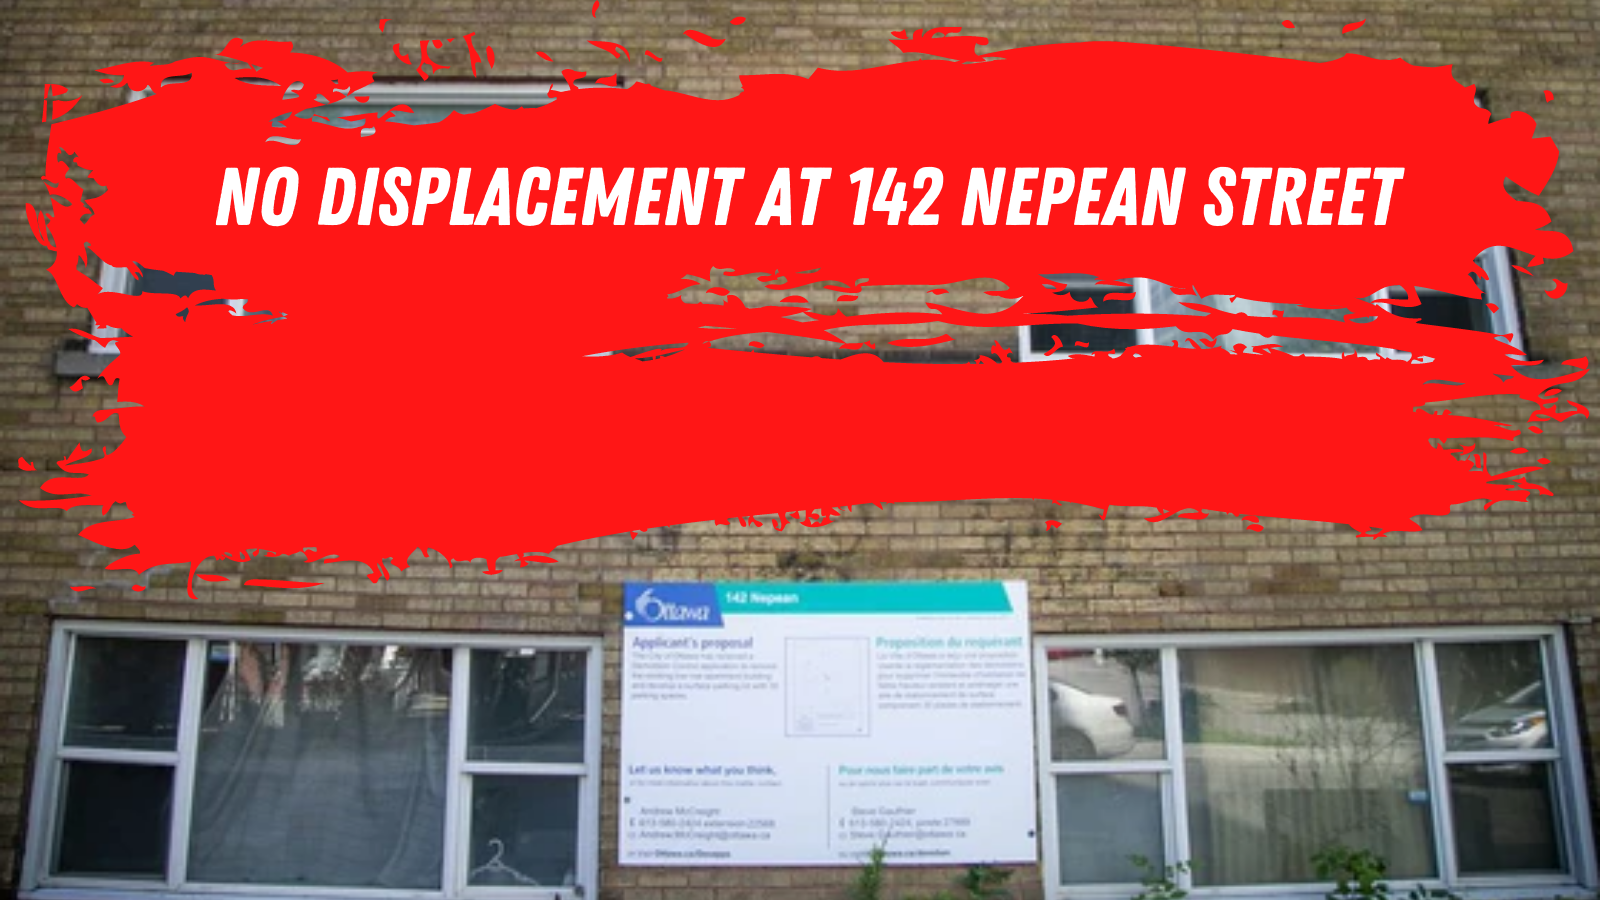 142 Nepean Street (Online action)